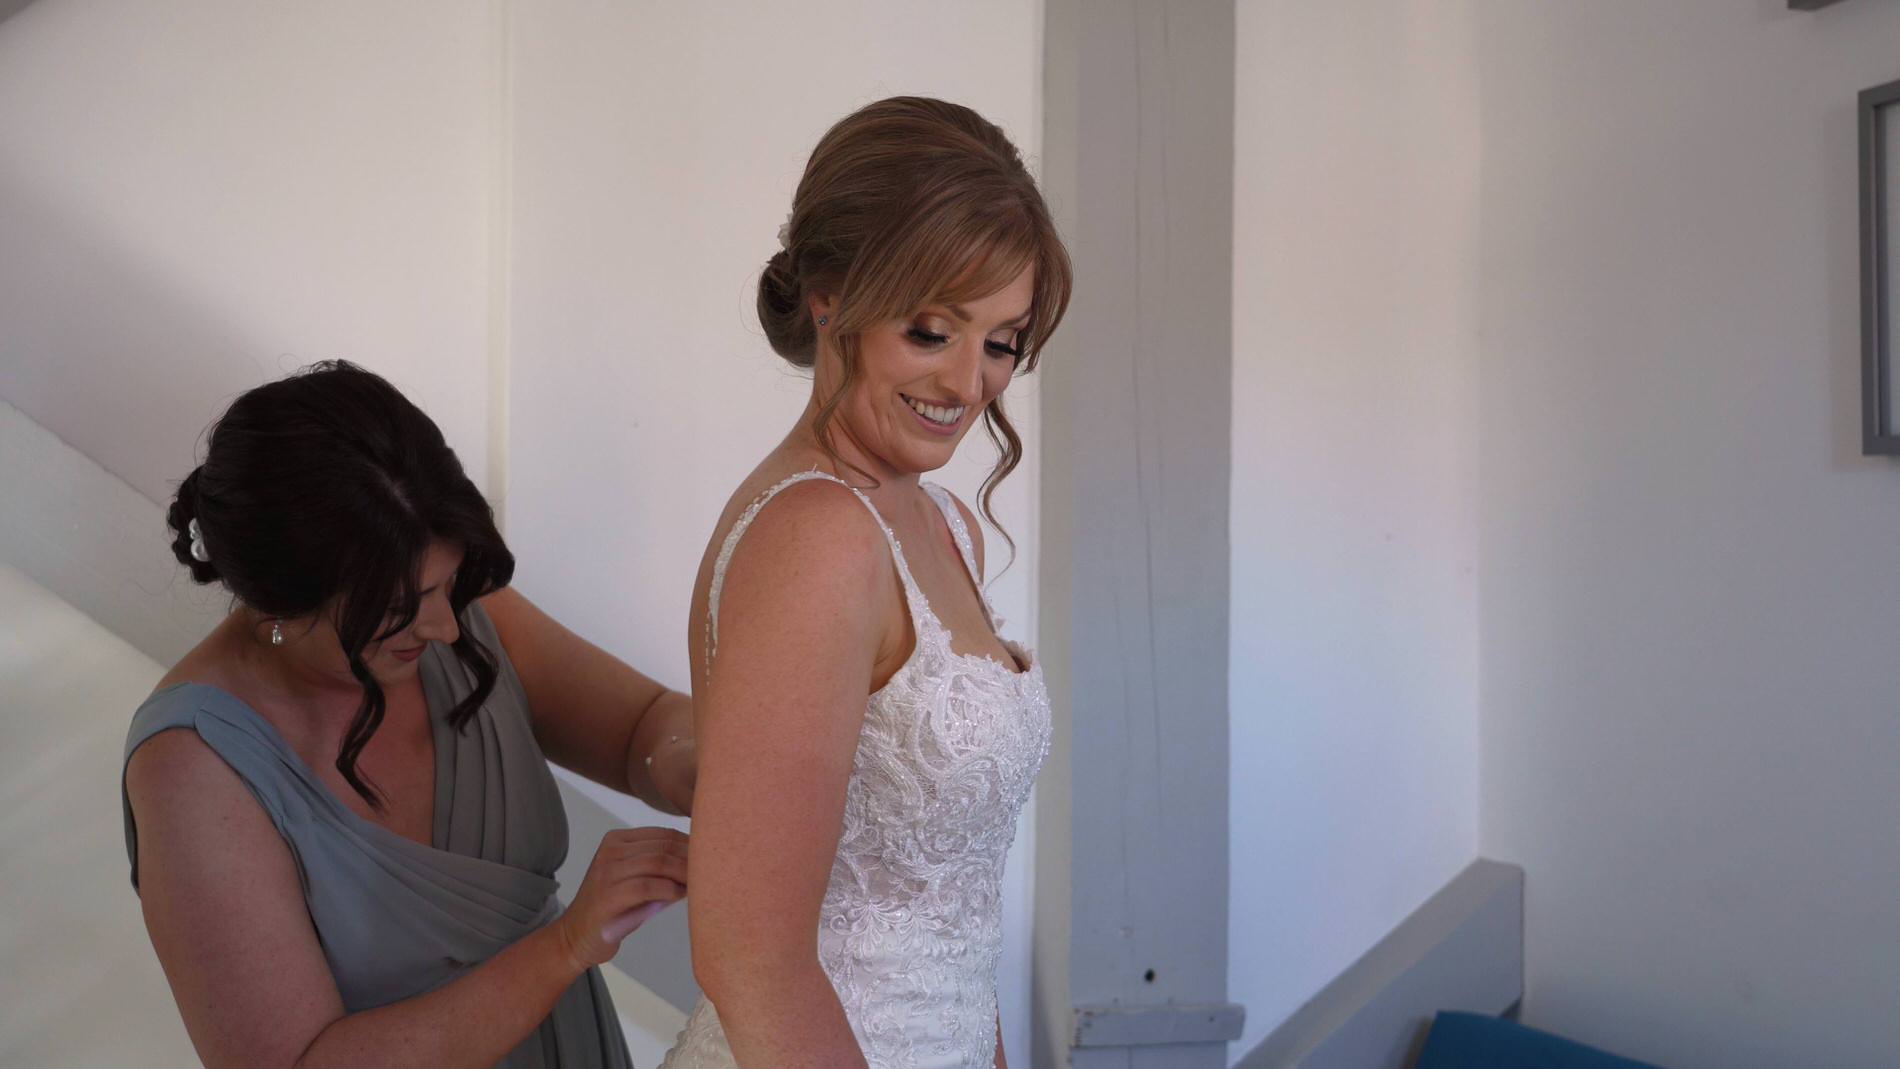 the brides sister helps fasten her dress buttons